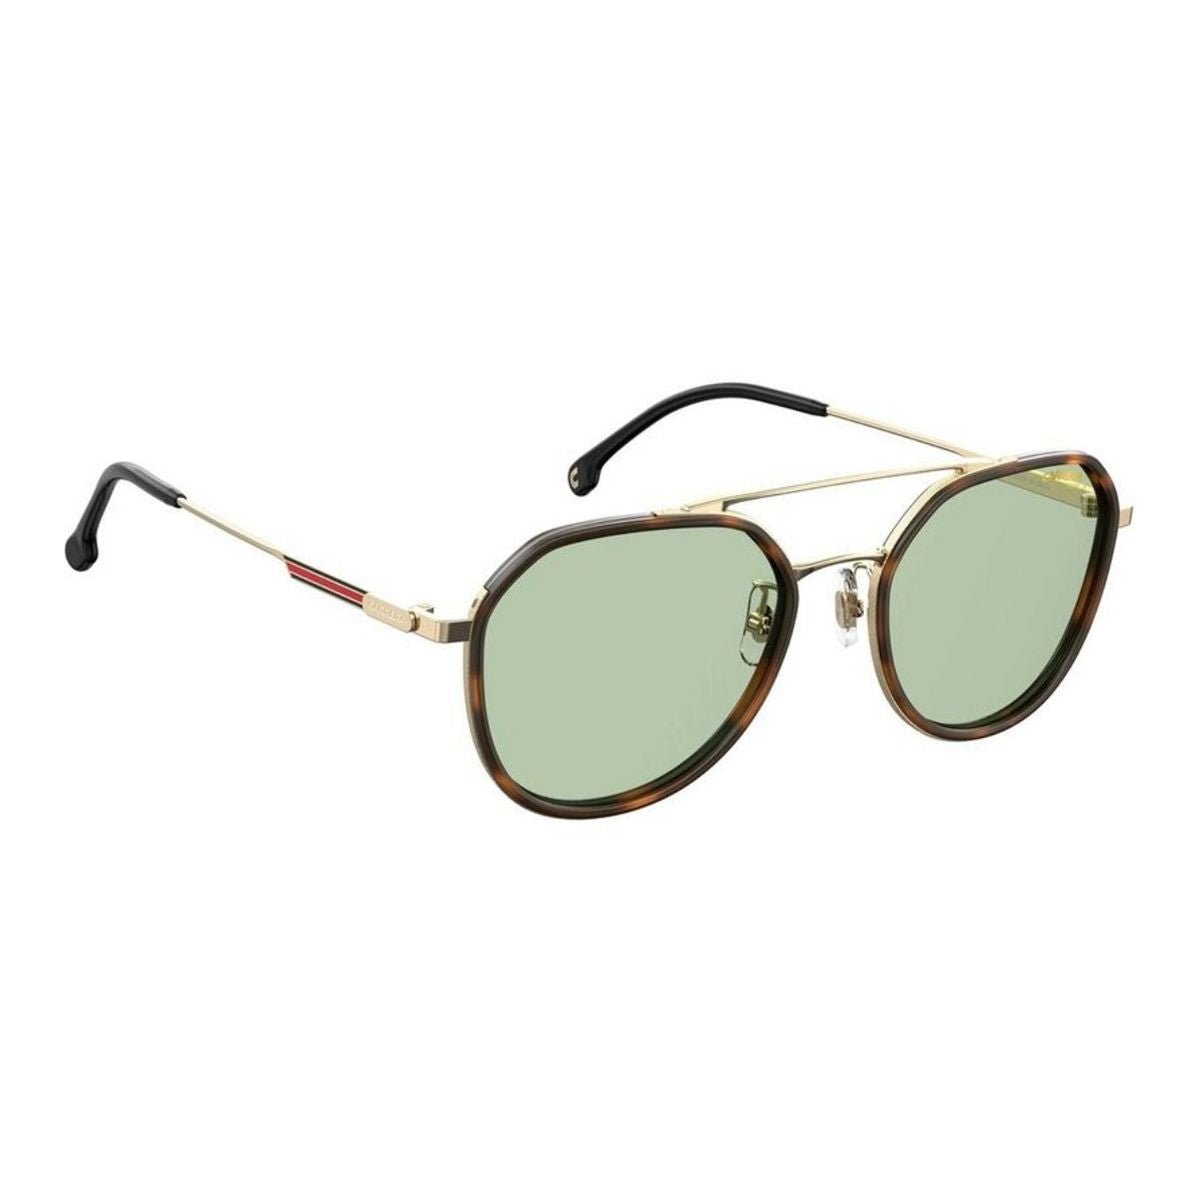 "Buy Gold Rounded Sunglasses For Both Mens And Womens At Optorium"